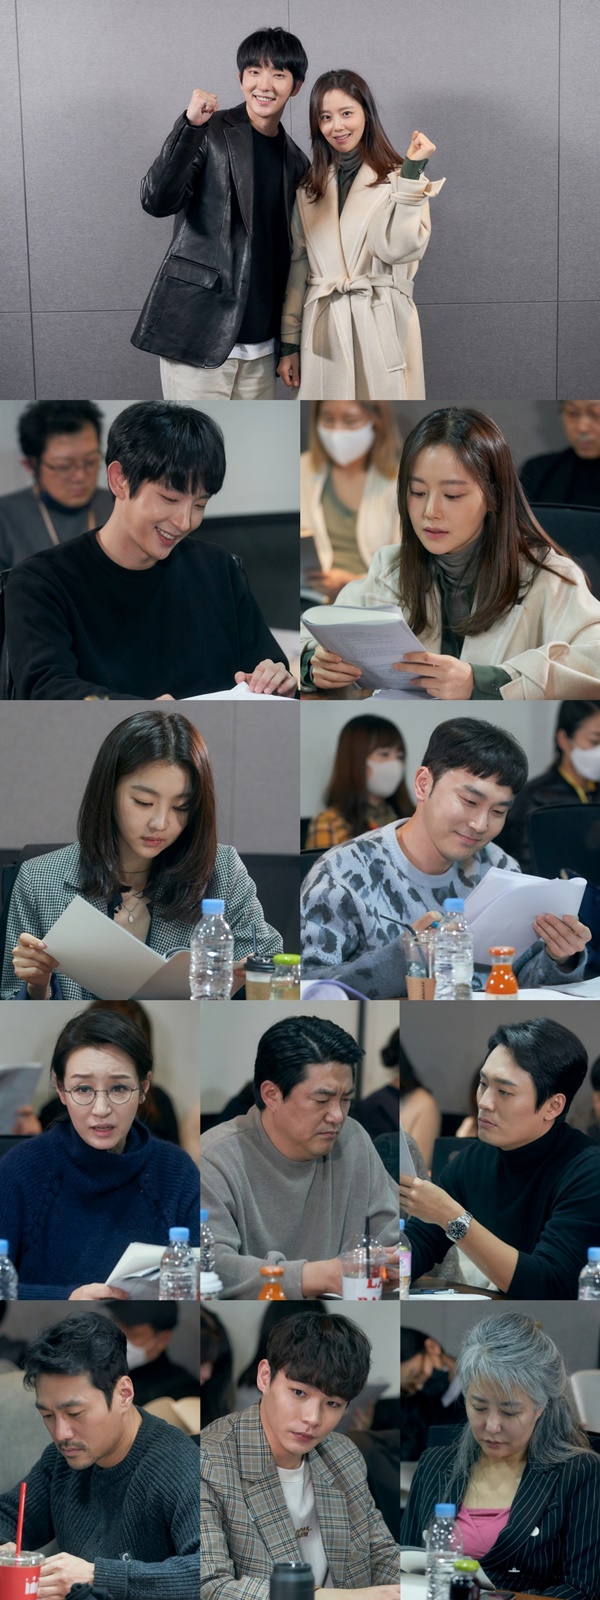 The Flower of Evil unveiled a golden lineup full of anticipation with the script reading scene where Lee Joon-gi, Moon Chae-won, Jang Hee-jin and Seo Hyeon-woos Hot Summer Days stand out.On the 18th, TVNs new tree drama The Flower of Evil (playplayplay by Yoo Jung-hee and director Kim Chul-gyu) announced the confirmation of the casting lineup.The work is a high-density emotional tracking drama of two people who hide the cruel past and change their identity, Lee Joon-gi, a Detective wife who tracks his past, and Cho Ji-won, a powerful woman who tracks his past.In the script reading scene that announced the start of the full-scale voyage, director Kim Chul-gyu of the luxury director who goes to and from the melodrama and thriller, and Yoo Jung-hee, who is attracting attention with his solid writing power, and actors who believe in Lee Joon-gi, Moon Chae-won, Jang Hee-jin and Seo Hyeon-woo as the main axis The East Sea coincided.Lee Joon-gi said, I want to leave it as a work that will be remembered for a long time for viewers. Moon Chae-won also expressed his enthusiasm that he would do Do best to show good acting as he met good works.Actors, who exchanged greetings in a cheerful atmosphere, began to bloom properly with Hot Summer Days, which immersed themselves in the roles and filled with the dialogue and emotions that they exchanged like Ping Pong.Lee Joon-gi, who was divided into Baek Hee-sung, a man who hid the past like a time bomb in the play, and even loved it, completed the breathtaking tightrope of the extreme, and Moon Chae-won showed a different act of acting with the double charm of his loving wife and charismatic powerful Detective.Above all, if the two melodramatic couple Chemie made the scene hot, the delicate Acting, which is suspicious of each other, filled the scene with breathtaking tension.In this way, Actors, who are not too much of a luxury actor, such as Kim Ji-hoon, Choi Byung-mo, Son Jong-hak, Nam Ki-ae and Yoon Byung-hee, who have a changing spectrum of Acting, will join together to increase their immersion.It is said that the production teams ambitious aspiration to make it impossible to let go of the tension as the additional impact figures continue to appear until the middle and late.In addition, the four-color, four-color, four-color, three-color, four-color, three-color, three-color, three-color, three-color, three-color, three-color, three-color, three-color, three-color, three-color, three-color, three-color, three-color, three-color, three-color, three-color, three-color, three-color, three-color, three-color, three-color, three-color, three-color, three-color, three-color, four-color, four-color, four-color, four-color, three-color, three-color,As such, Lee Joon-gi, Moon Chae-won, Jang Hee-jin, and Seo Hyeon-woo, as well as directing and scripting, will be the first to broadcast in July.